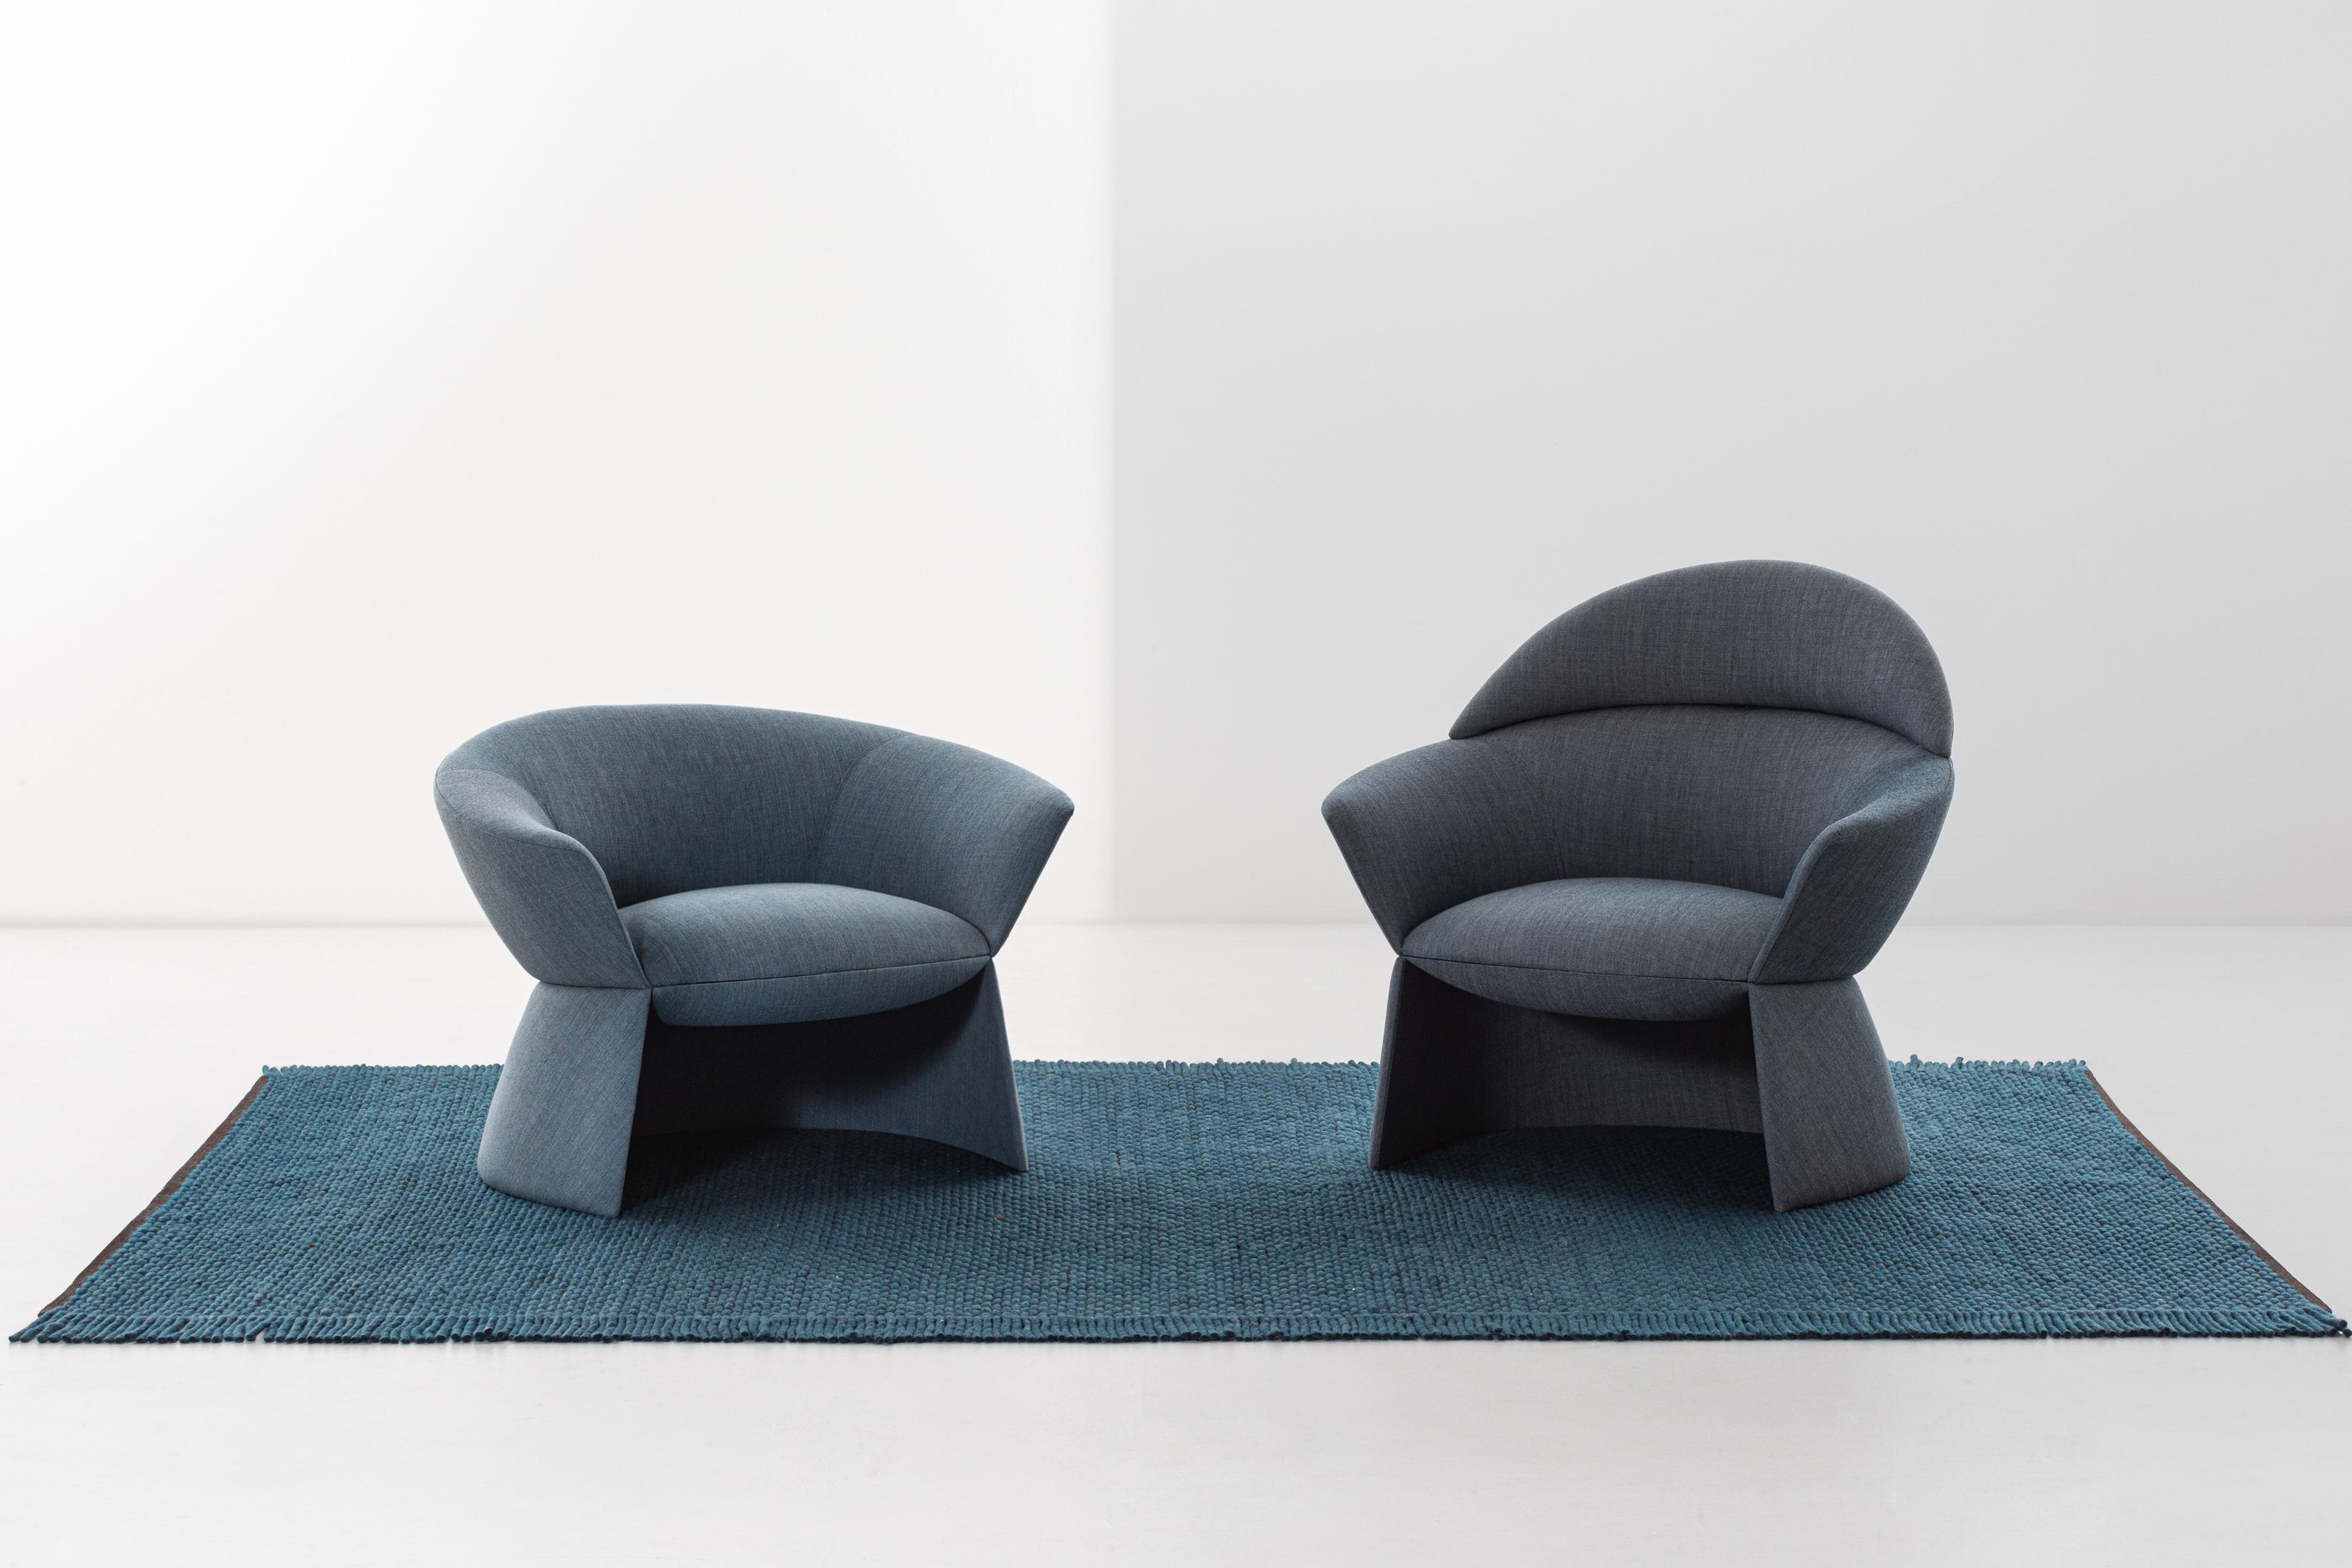 Italian Swale Low Armchair in Super Remix 3 Upholstery Seat & Base by Gordon Guillaumier For Sale